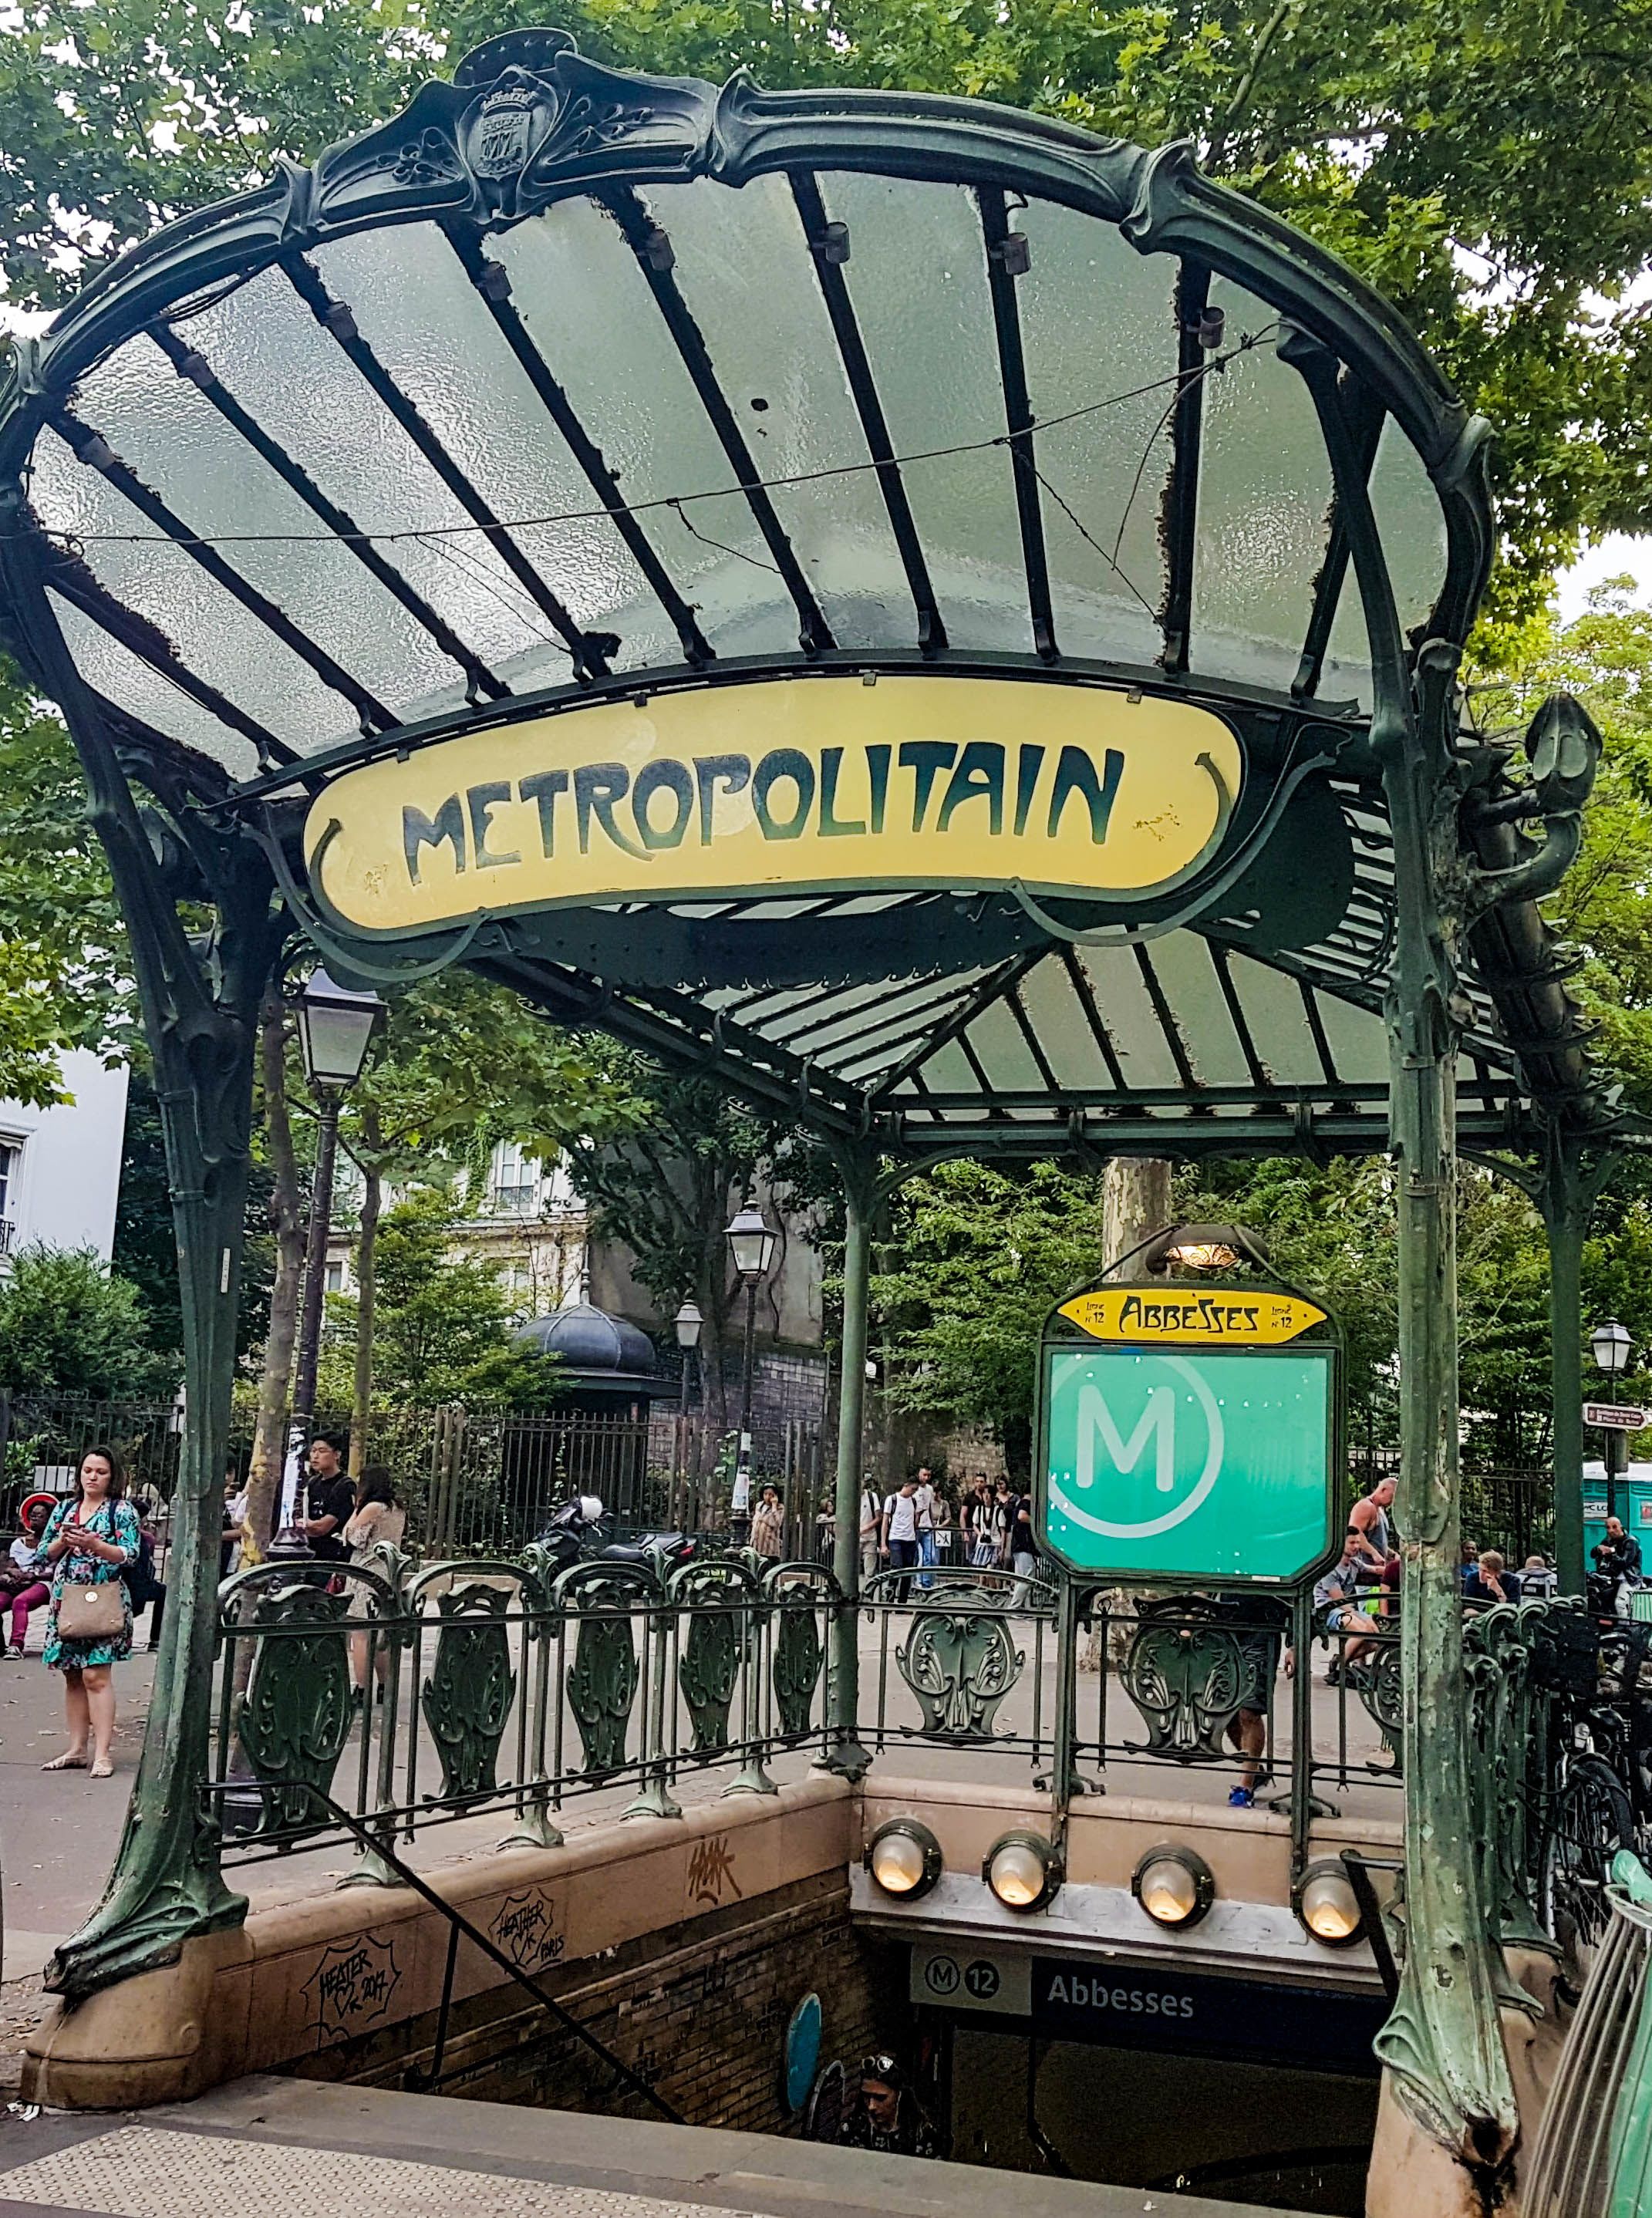 The Paris Métro's art nouveau entrance canopies, designed by Hector Guimard, are known around the world,